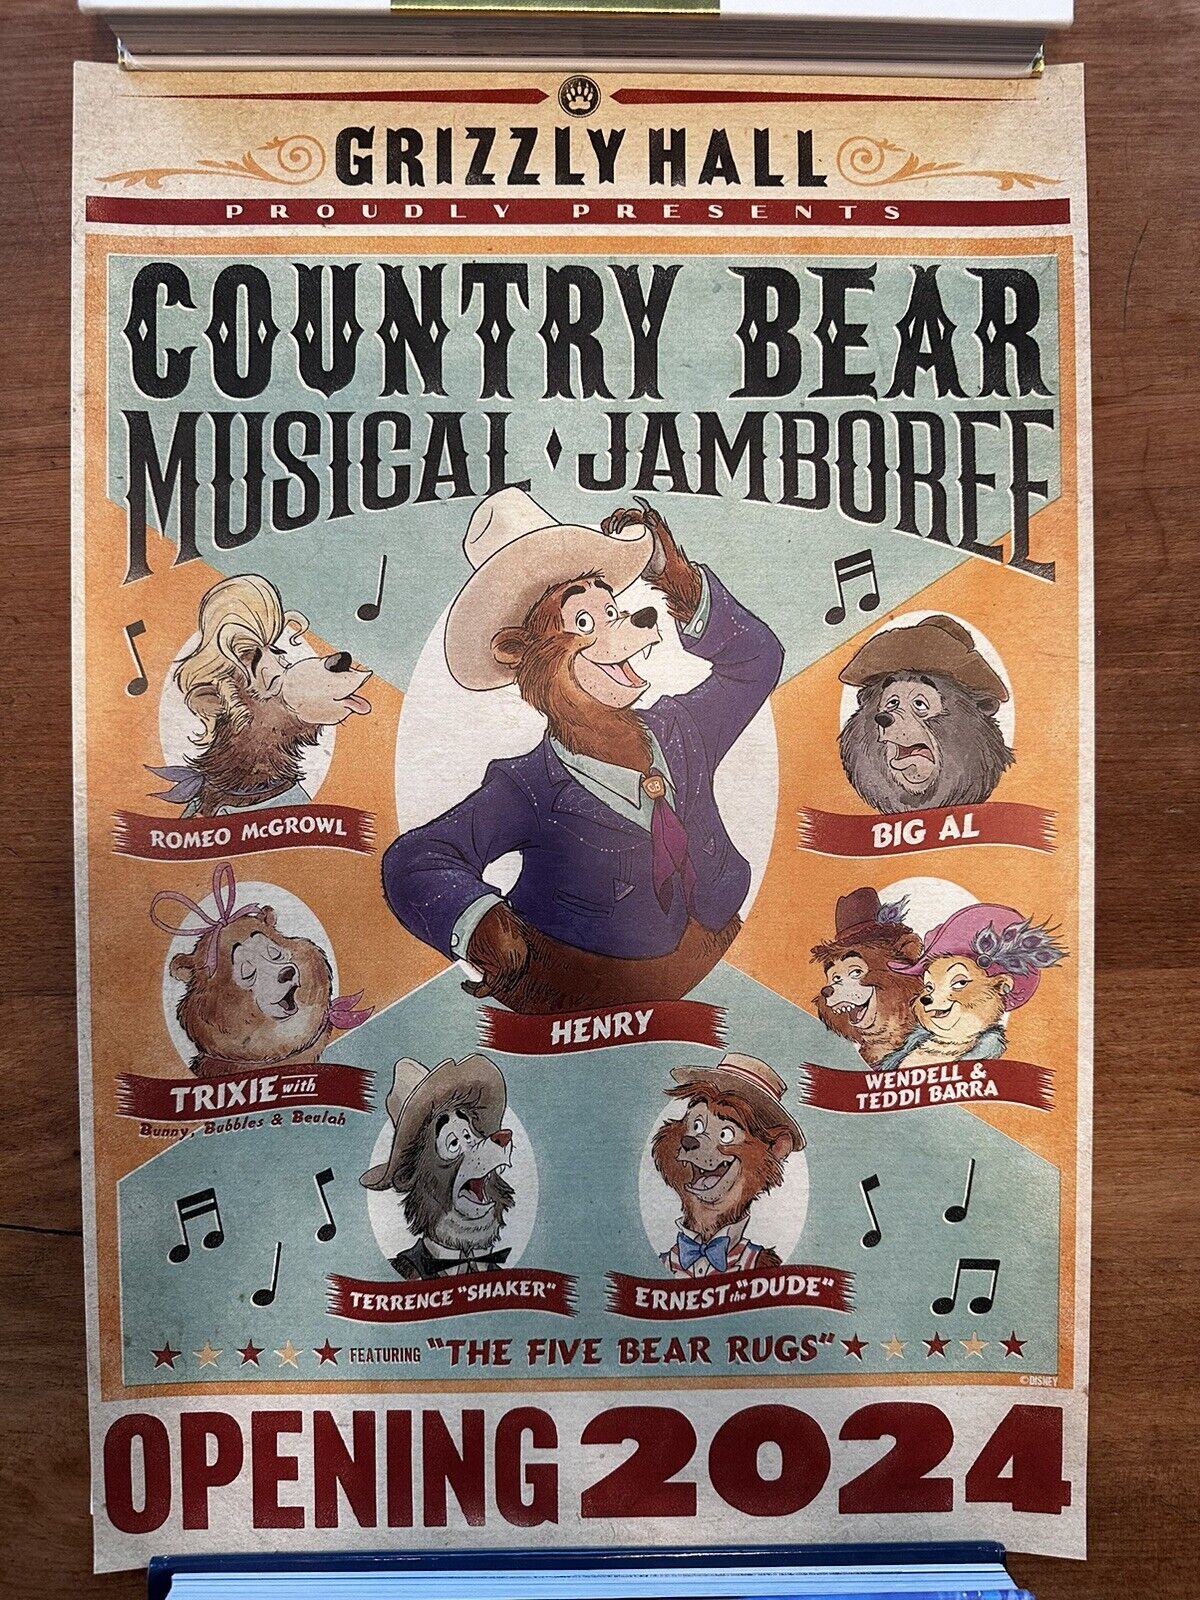 Destination D23 2023 Exclusive Country Bear Musical Jamboree Poster